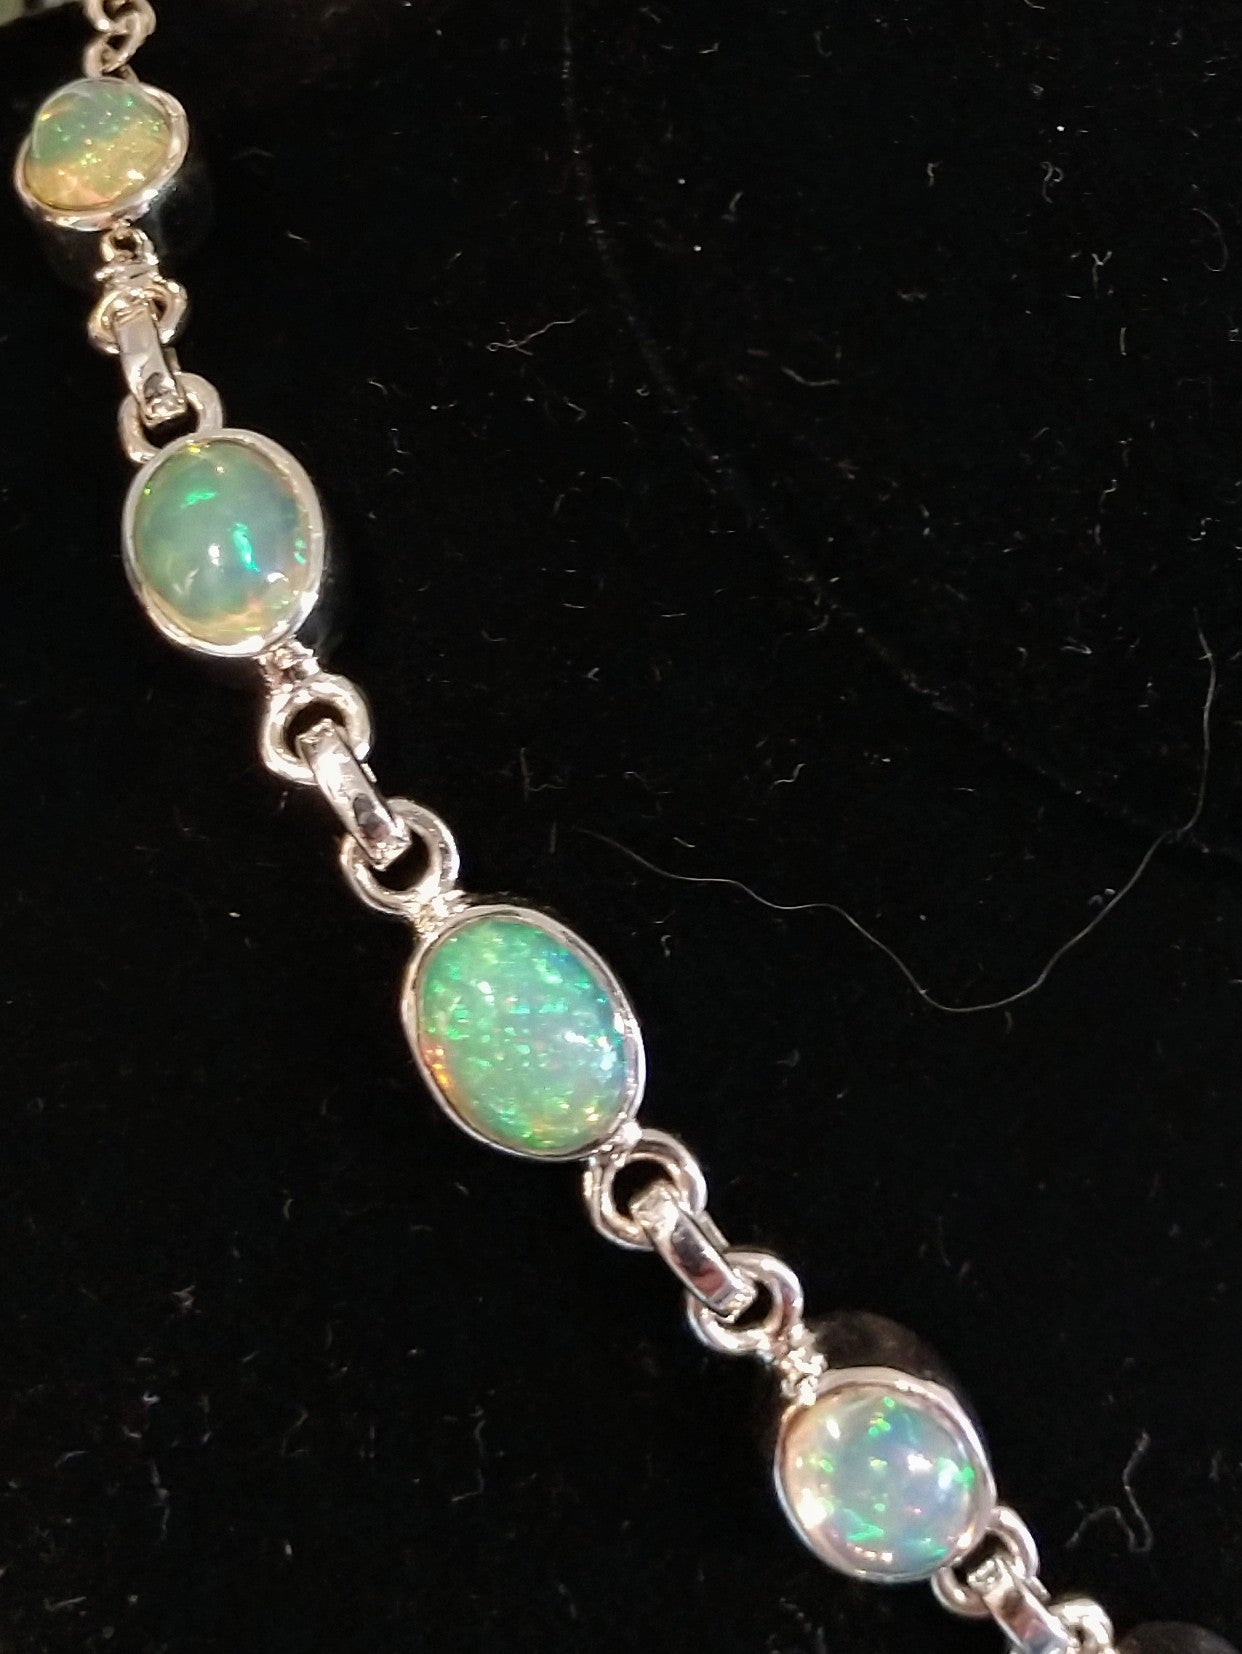 Opal necklace in sterling silver setting